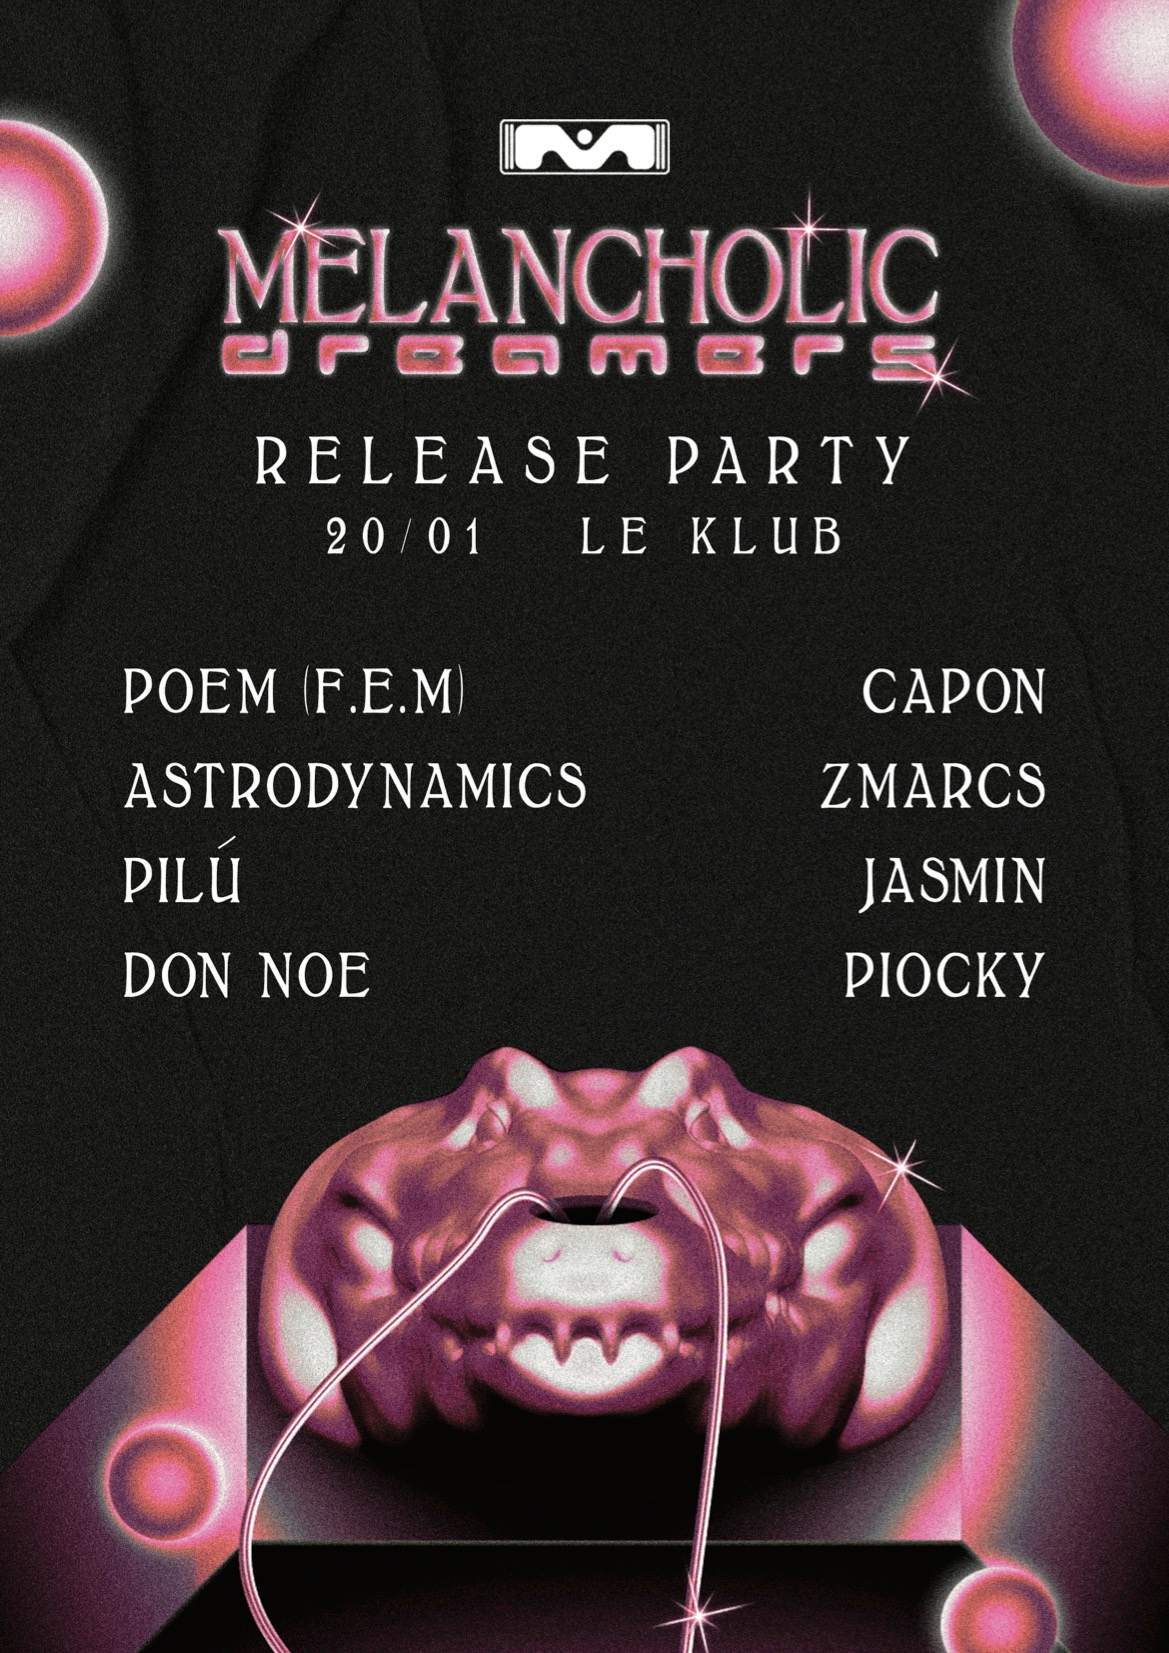 Melancholic Dreamers - Release Party - フライヤー裏